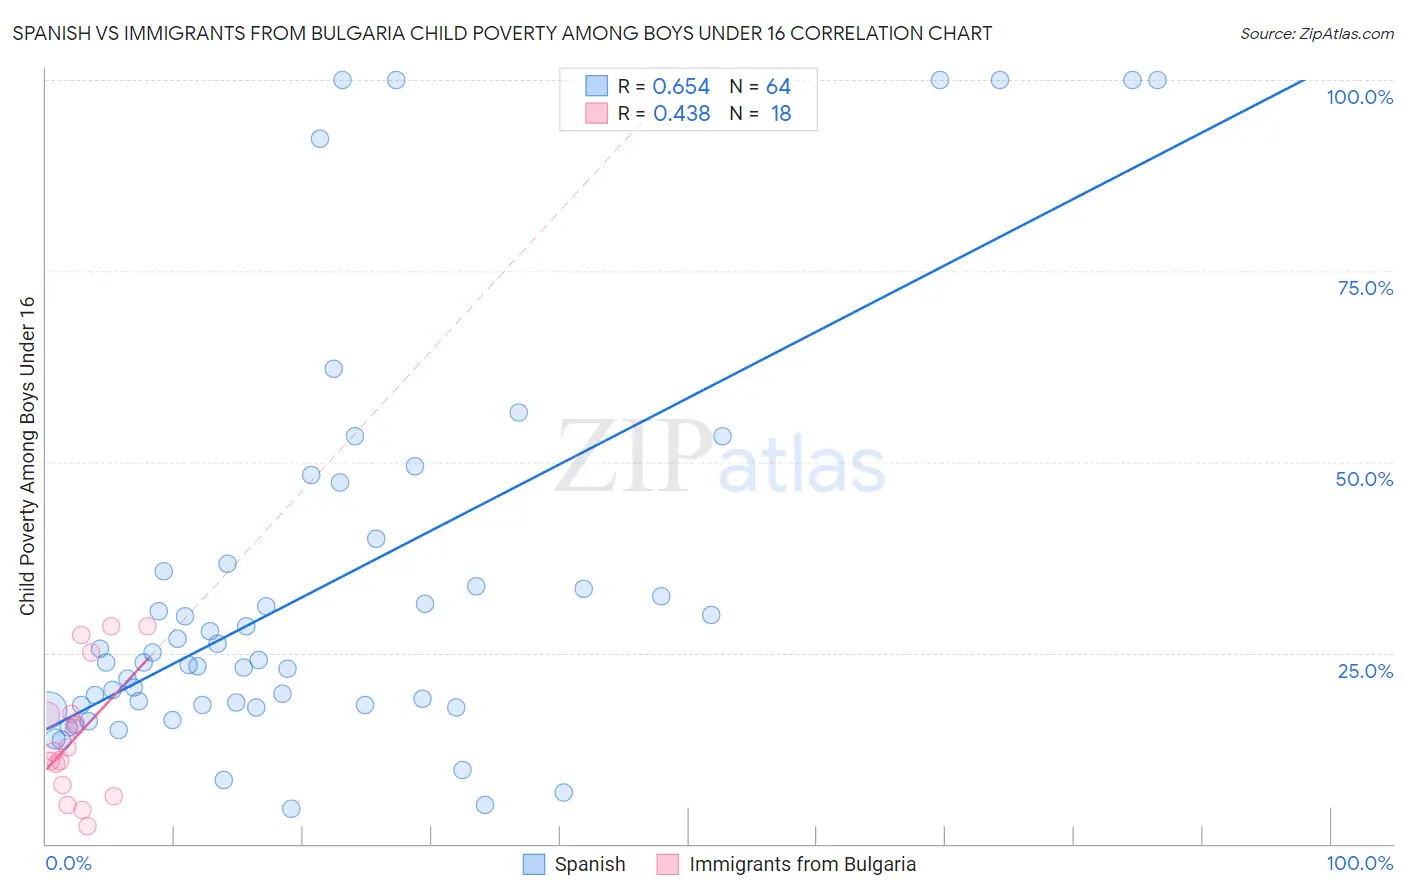 Spanish vs Immigrants from Bulgaria Child Poverty Among Boys Under 16